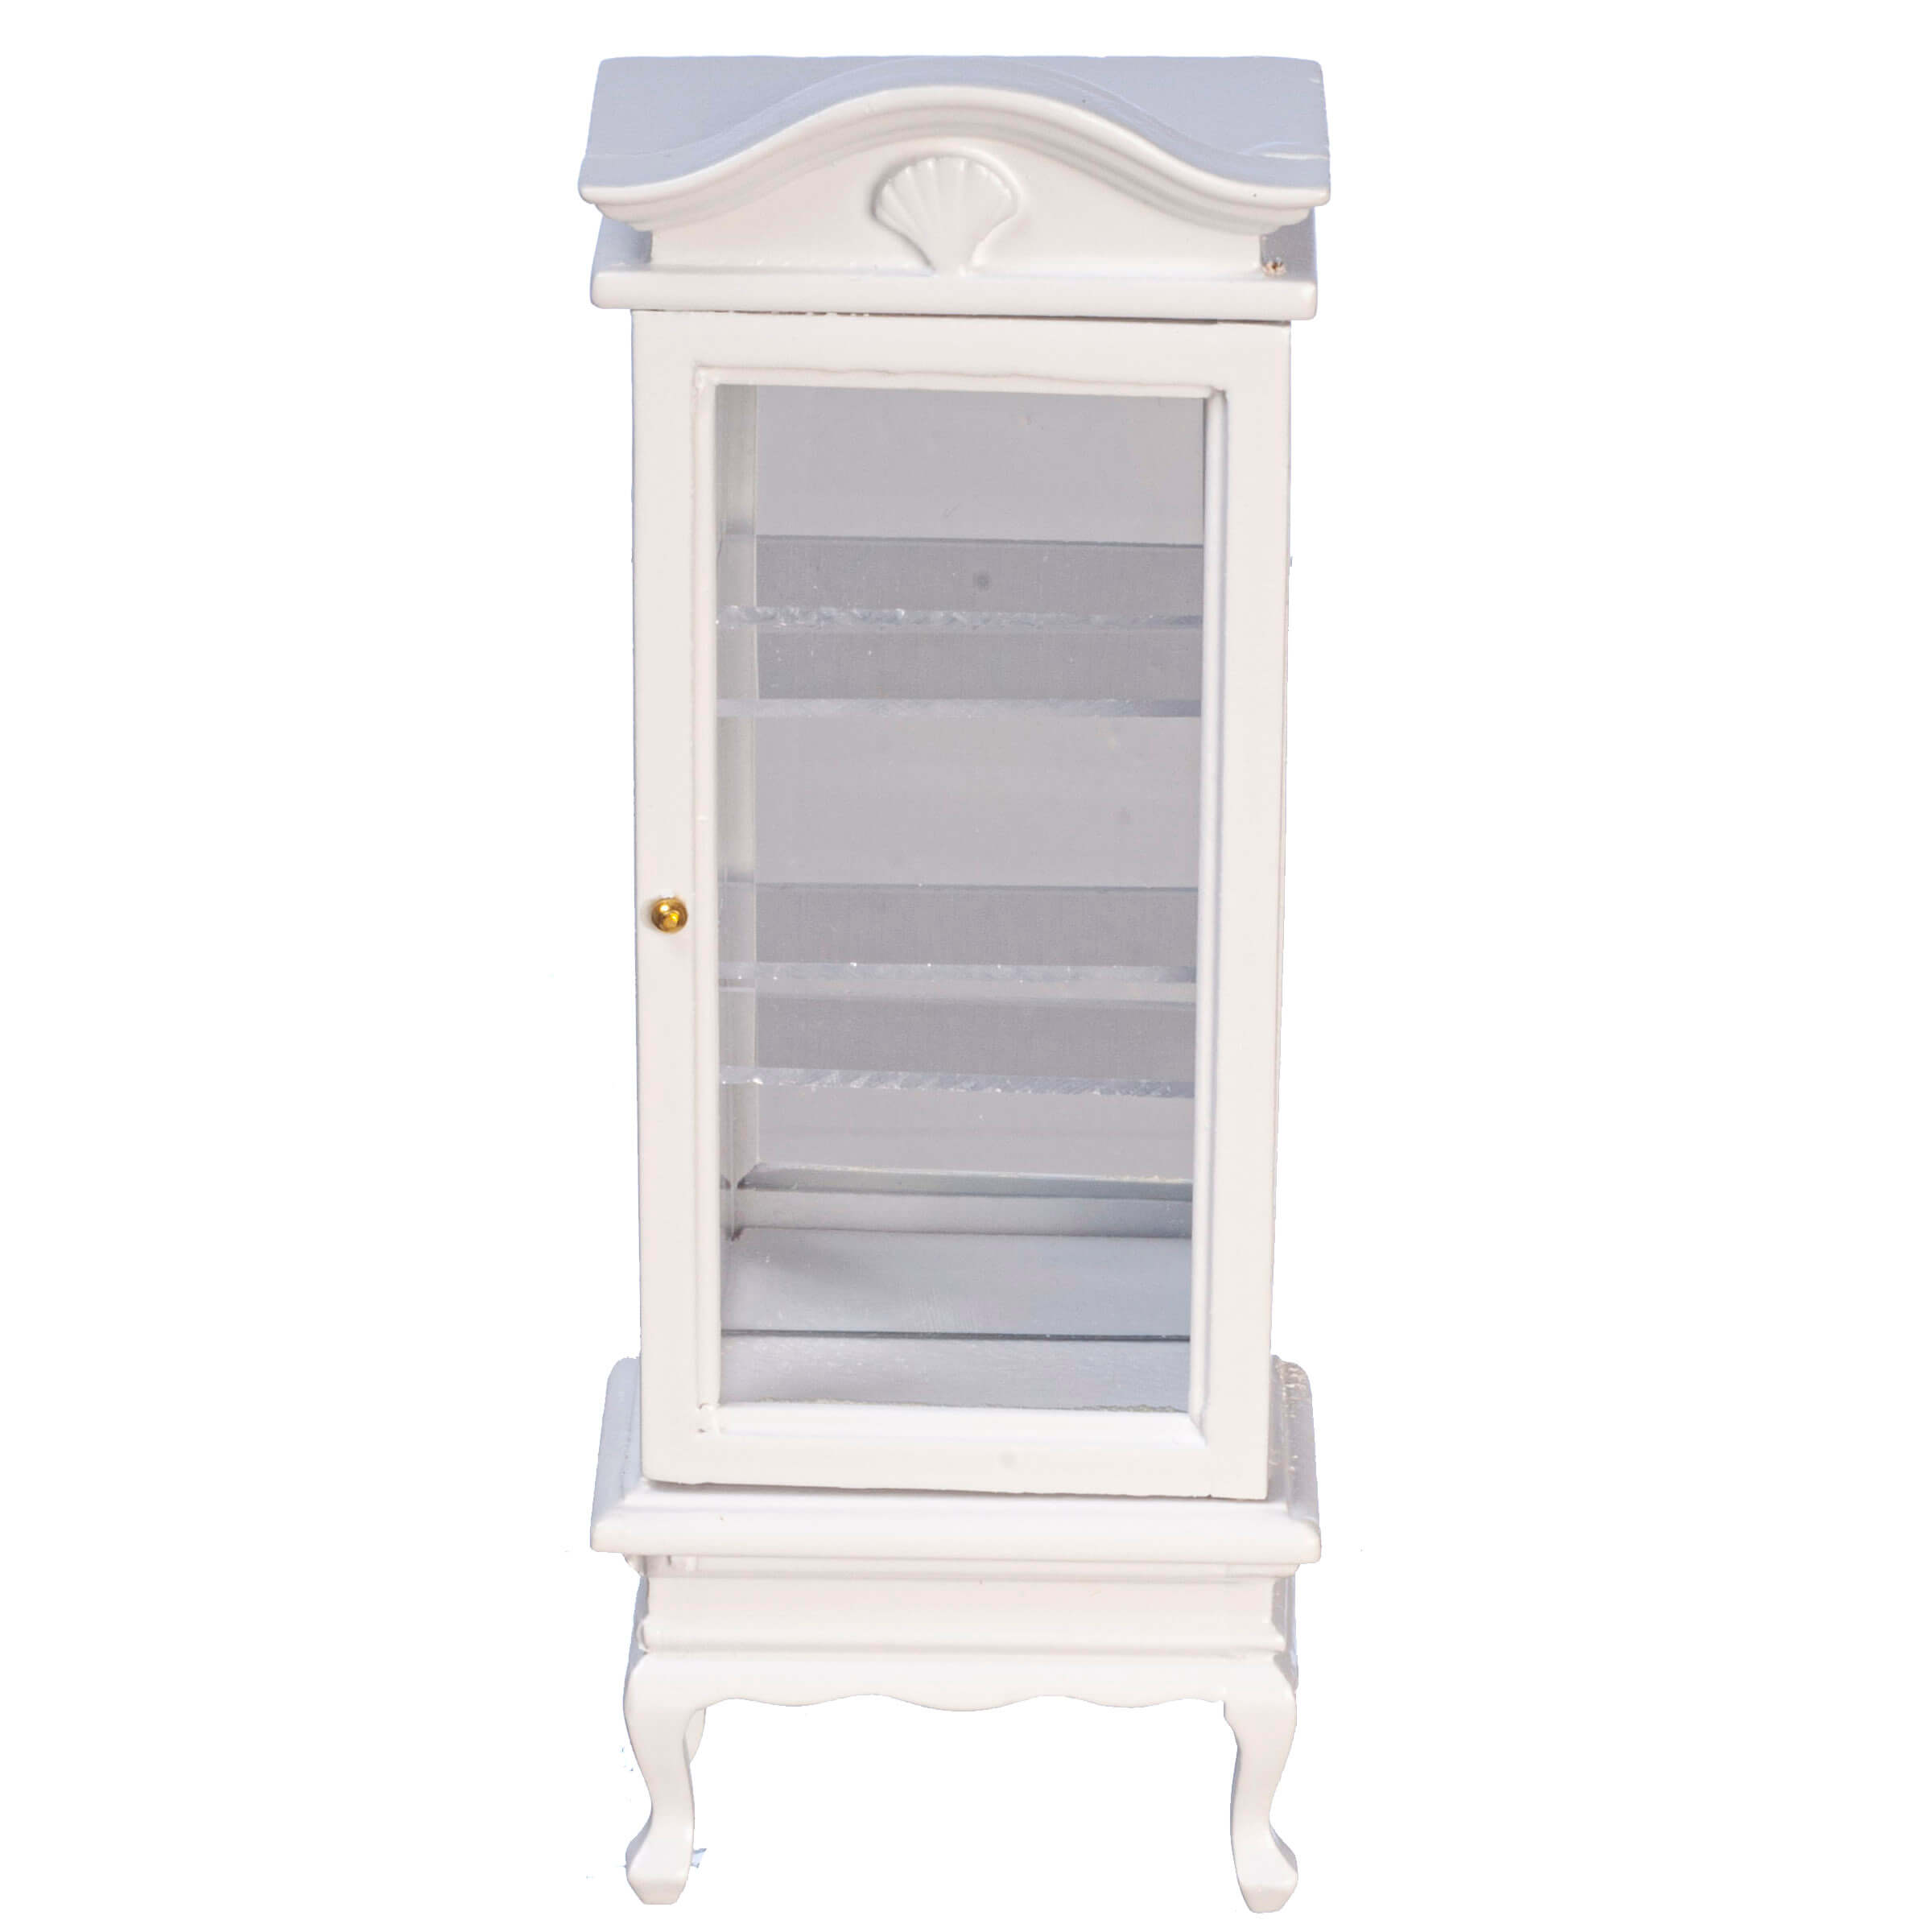 Display Cabinet - White